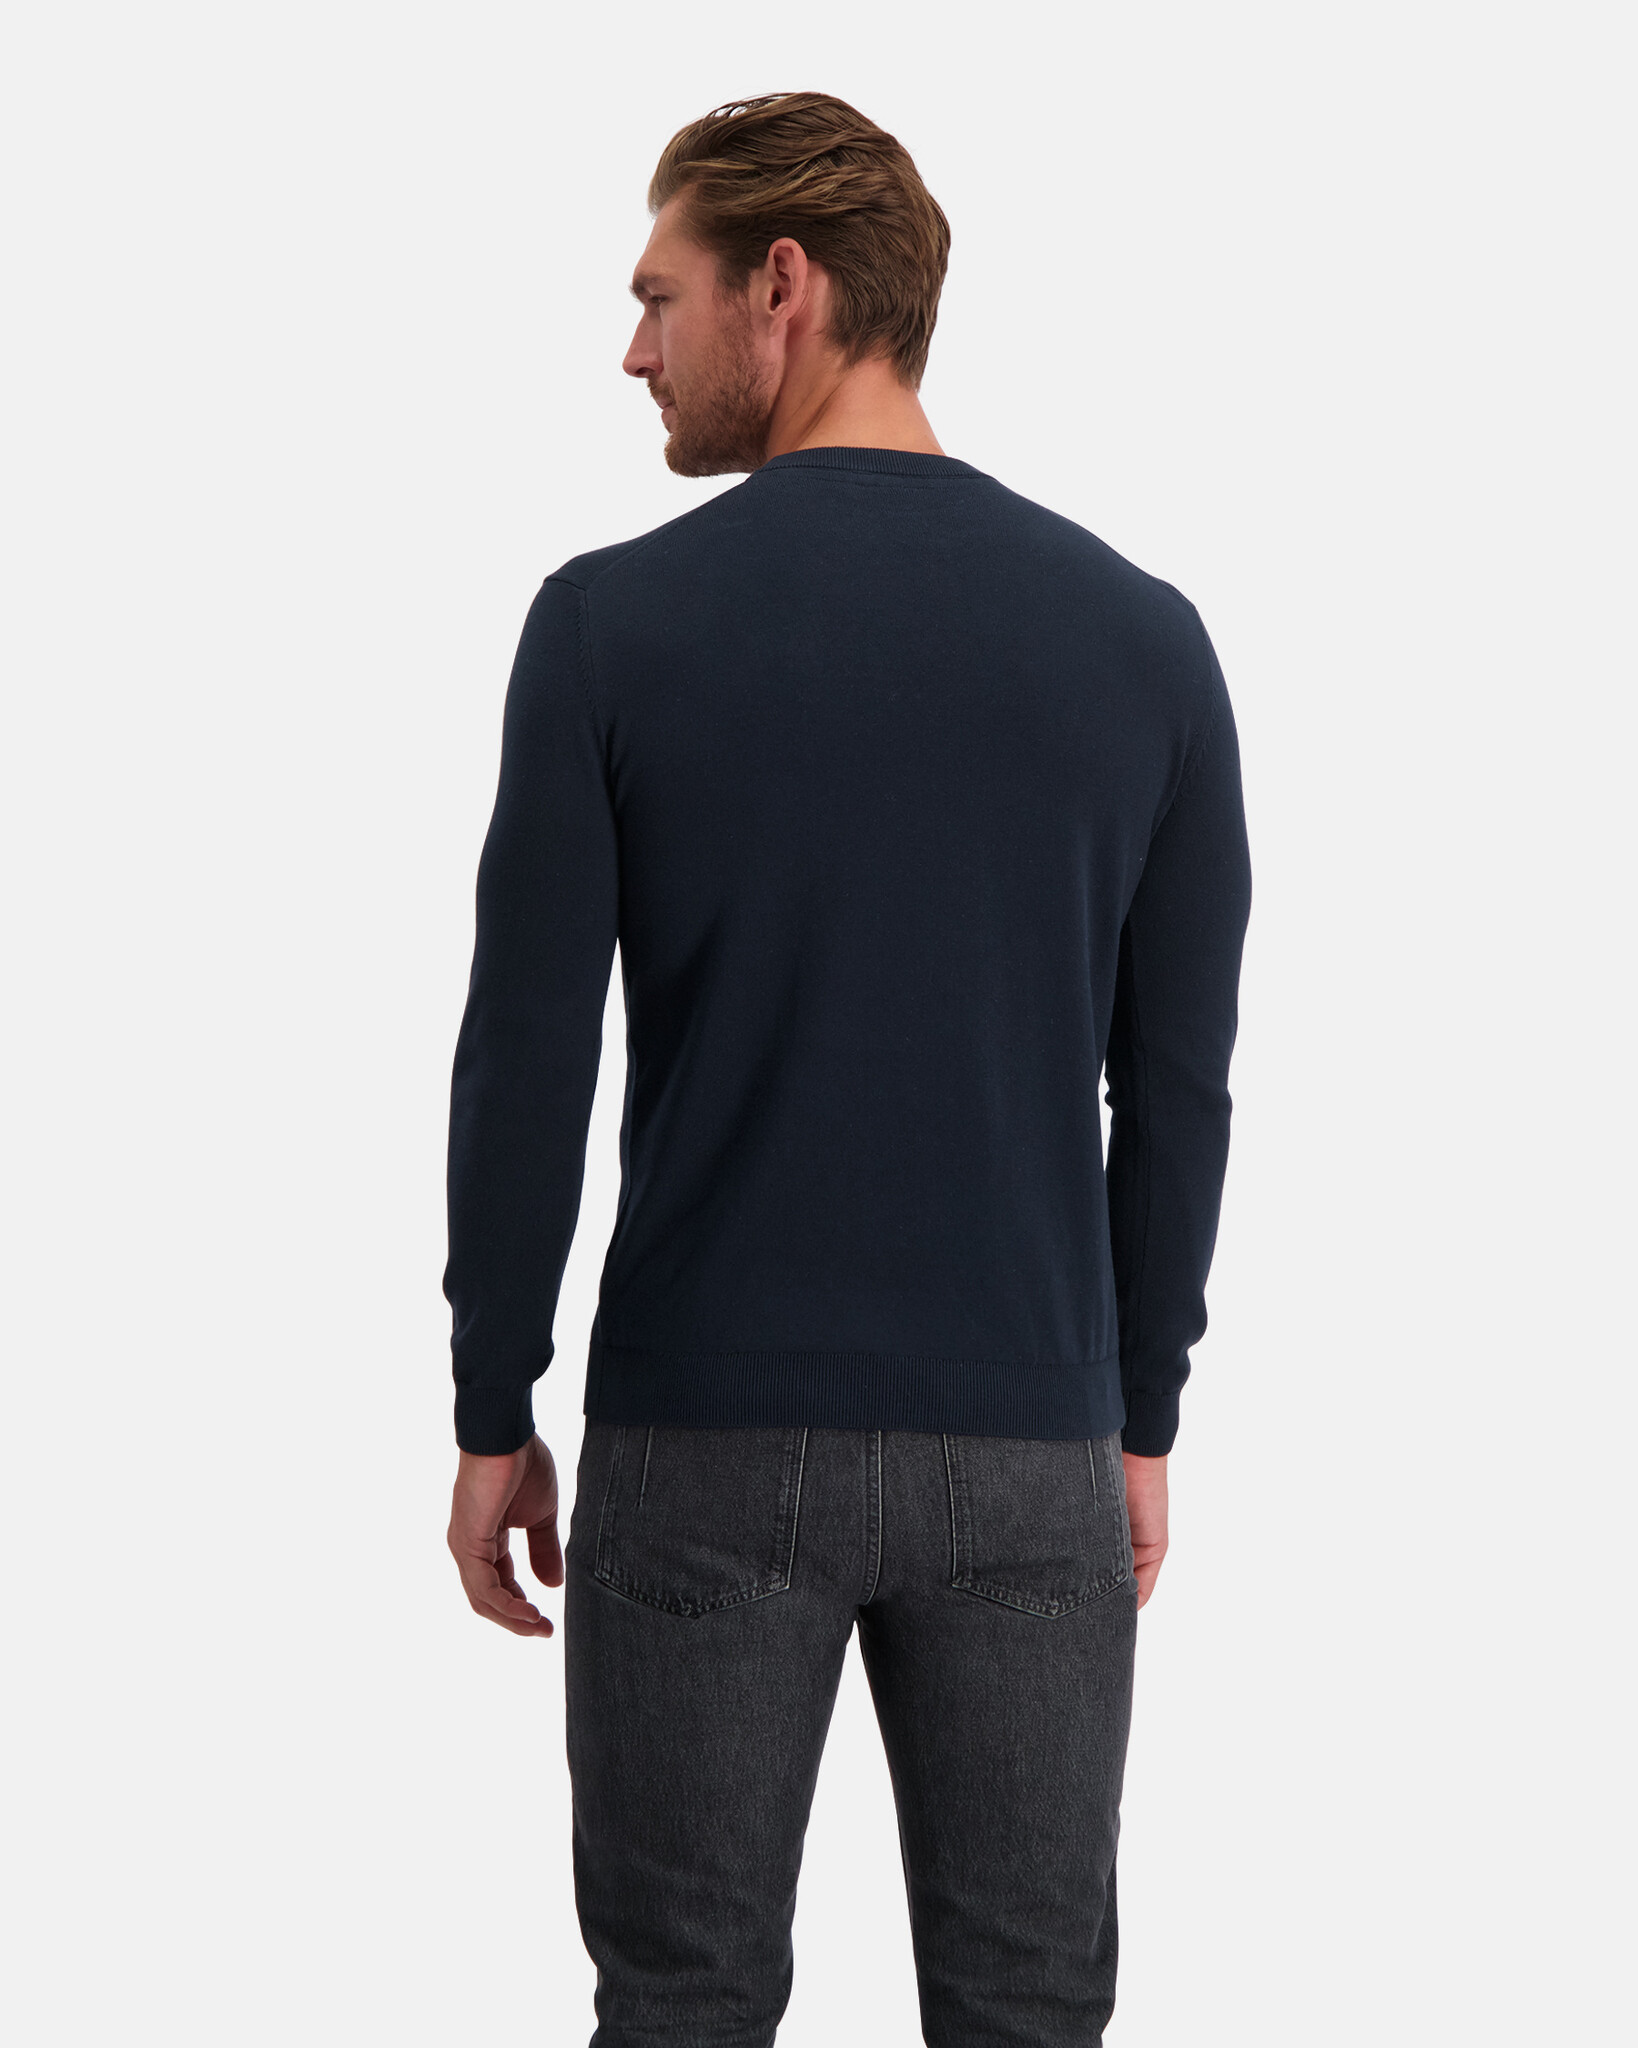 Round neck fine cotton silk blend pullover with tonal trademark tower logo on chest